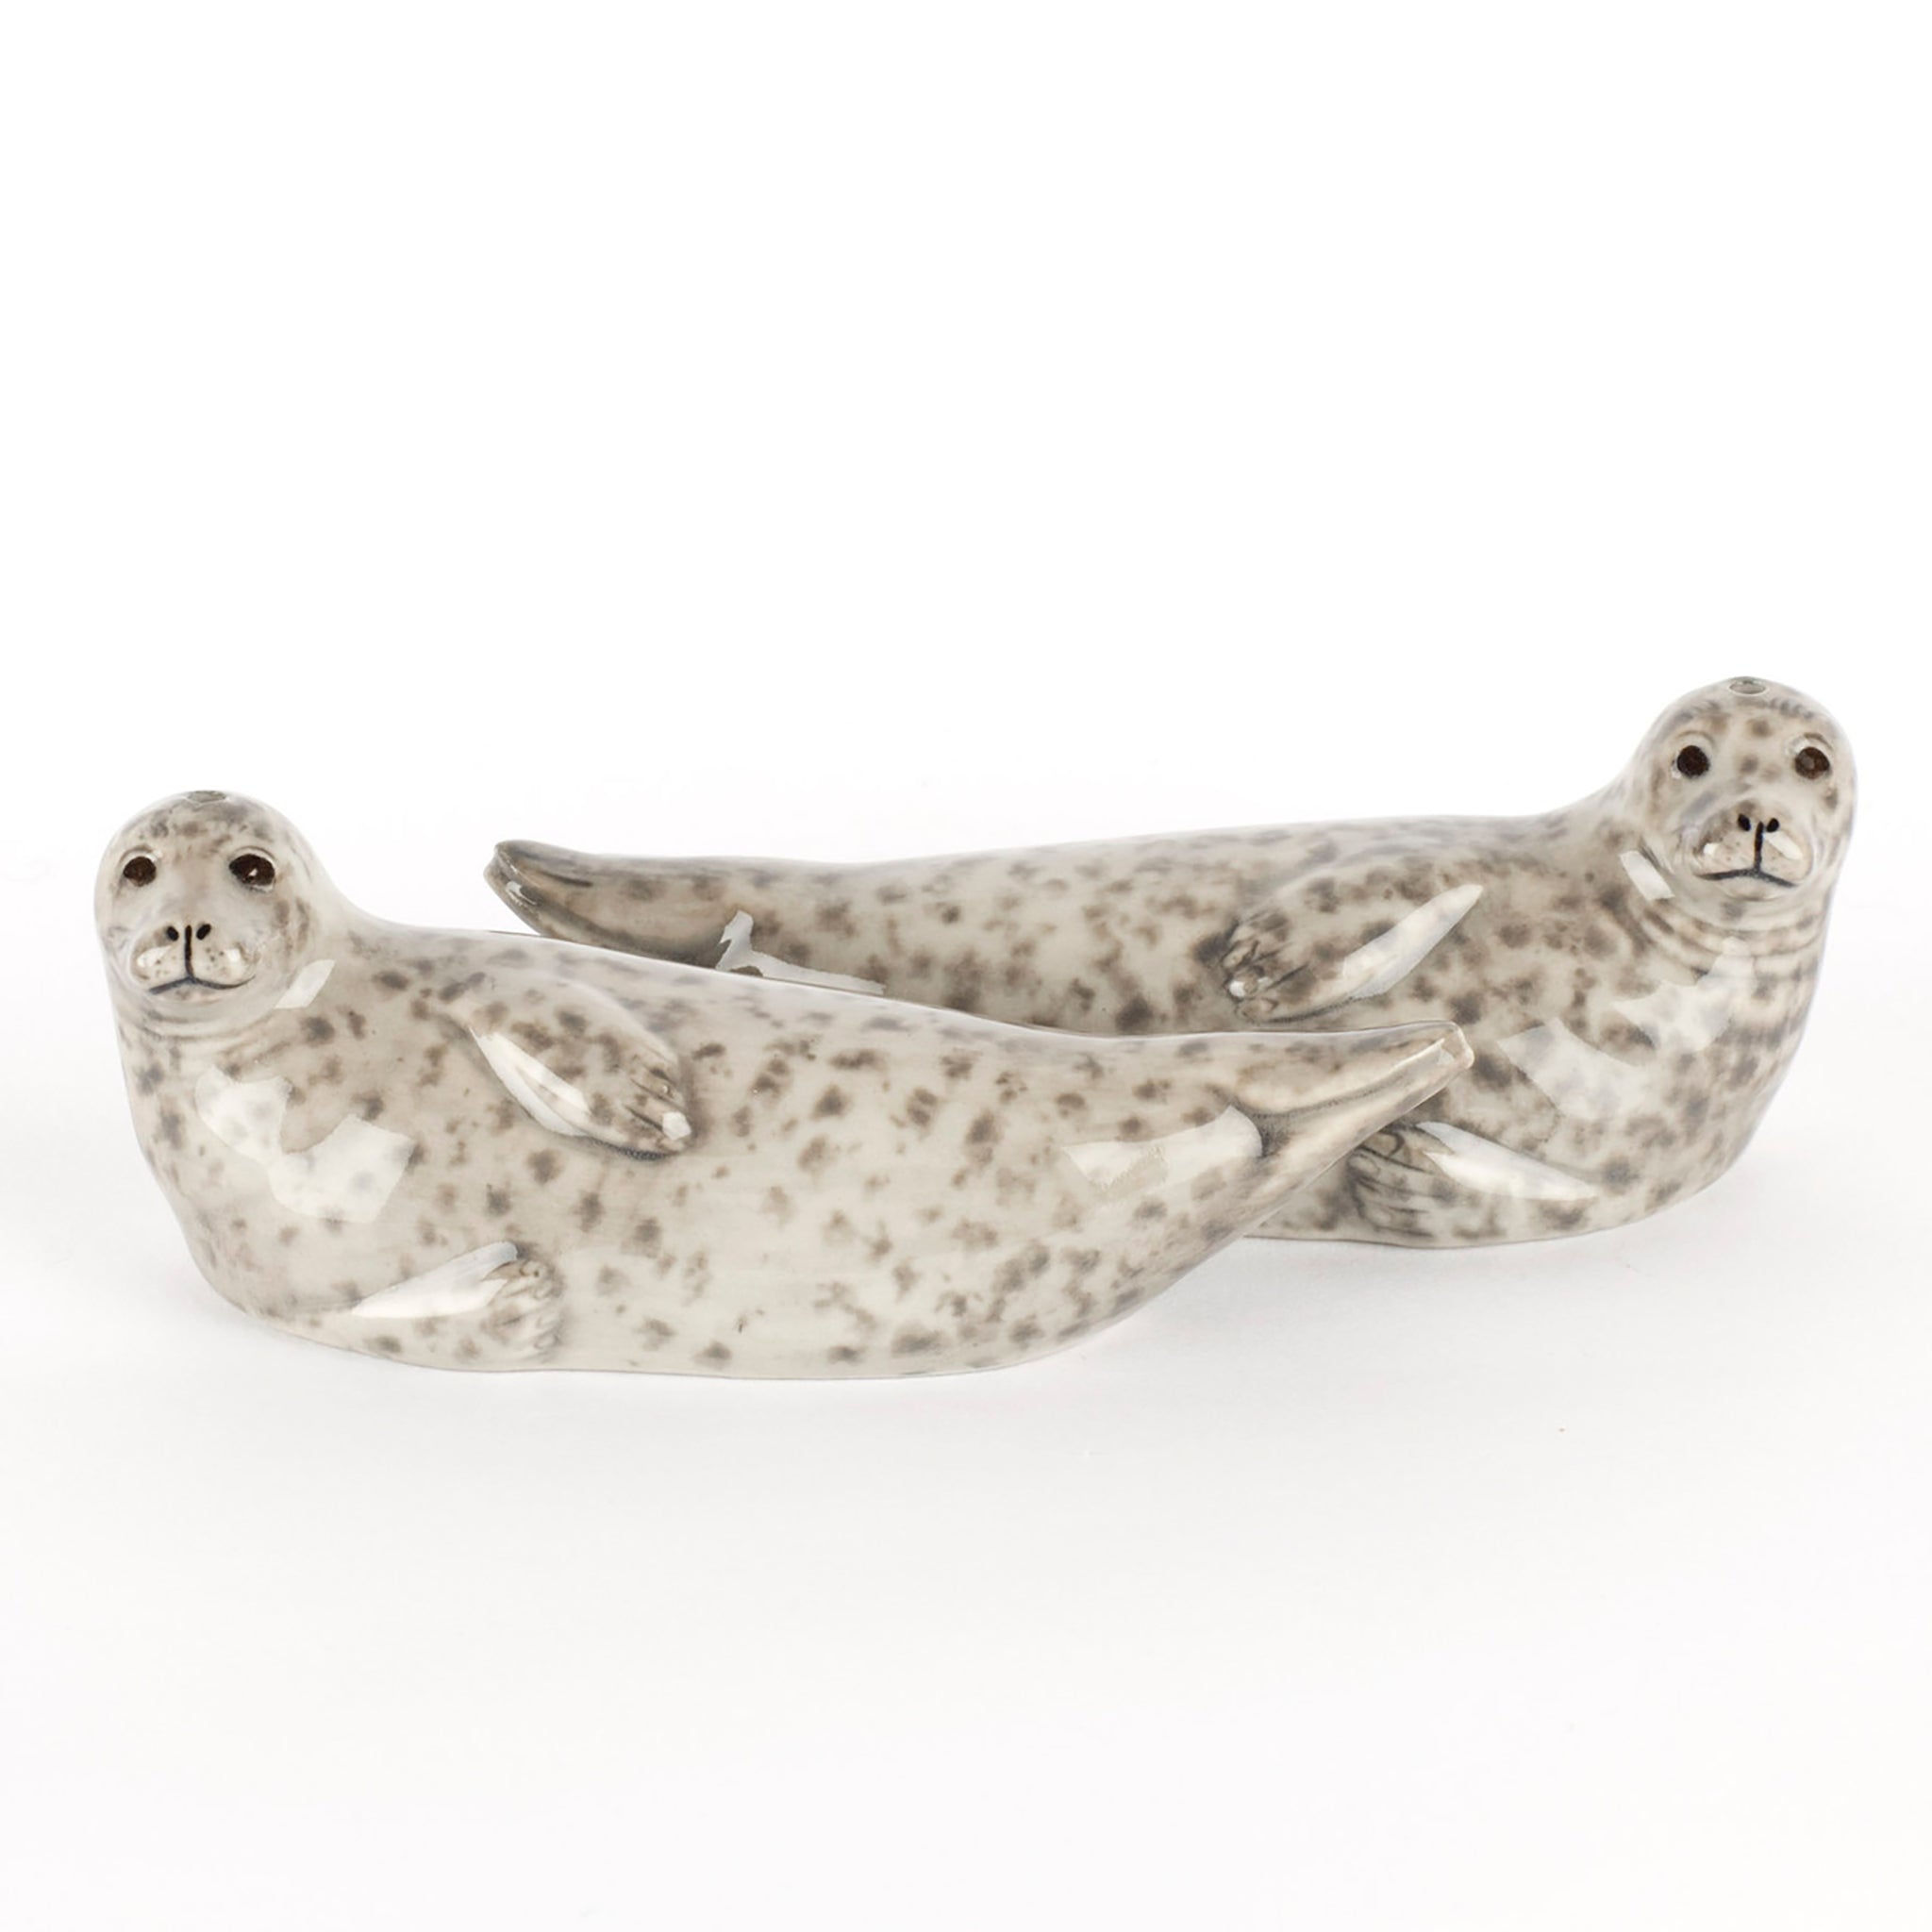 A pair of glazed ceramic salt and pepper shakers in the shape of grey spotted seals